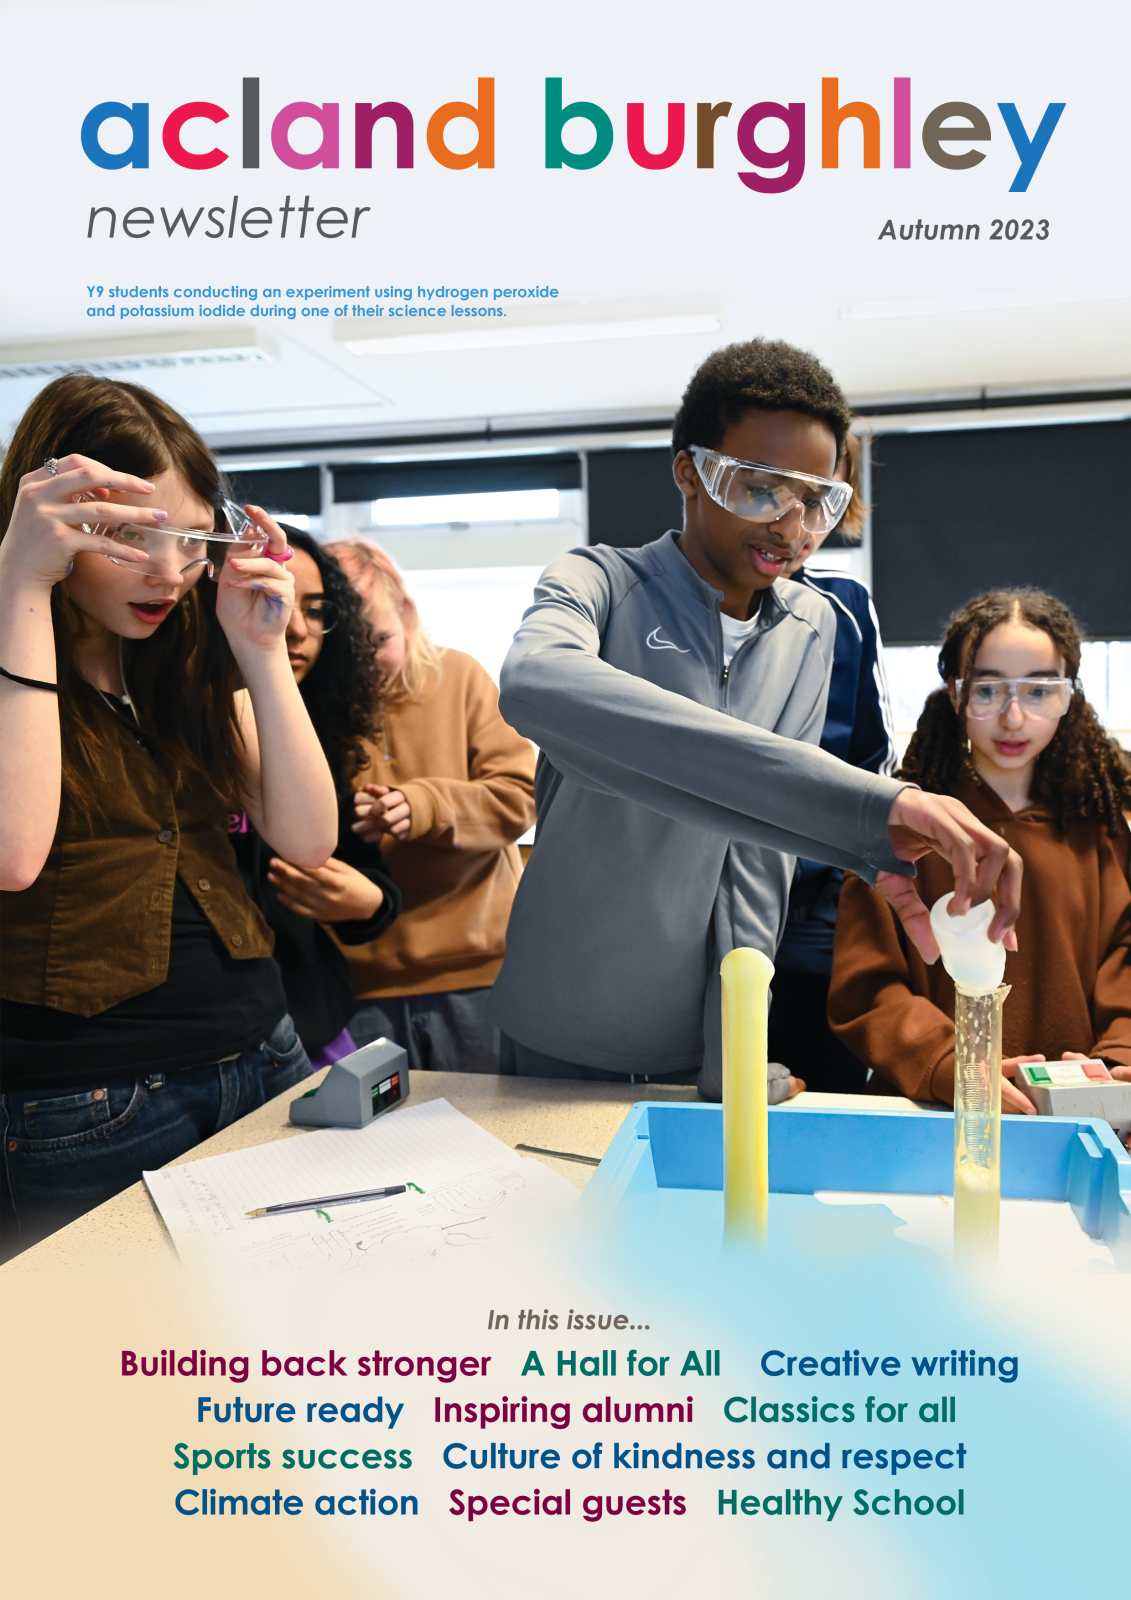 Autumn 2023 Newsletter cover featuring students doing a science experiment